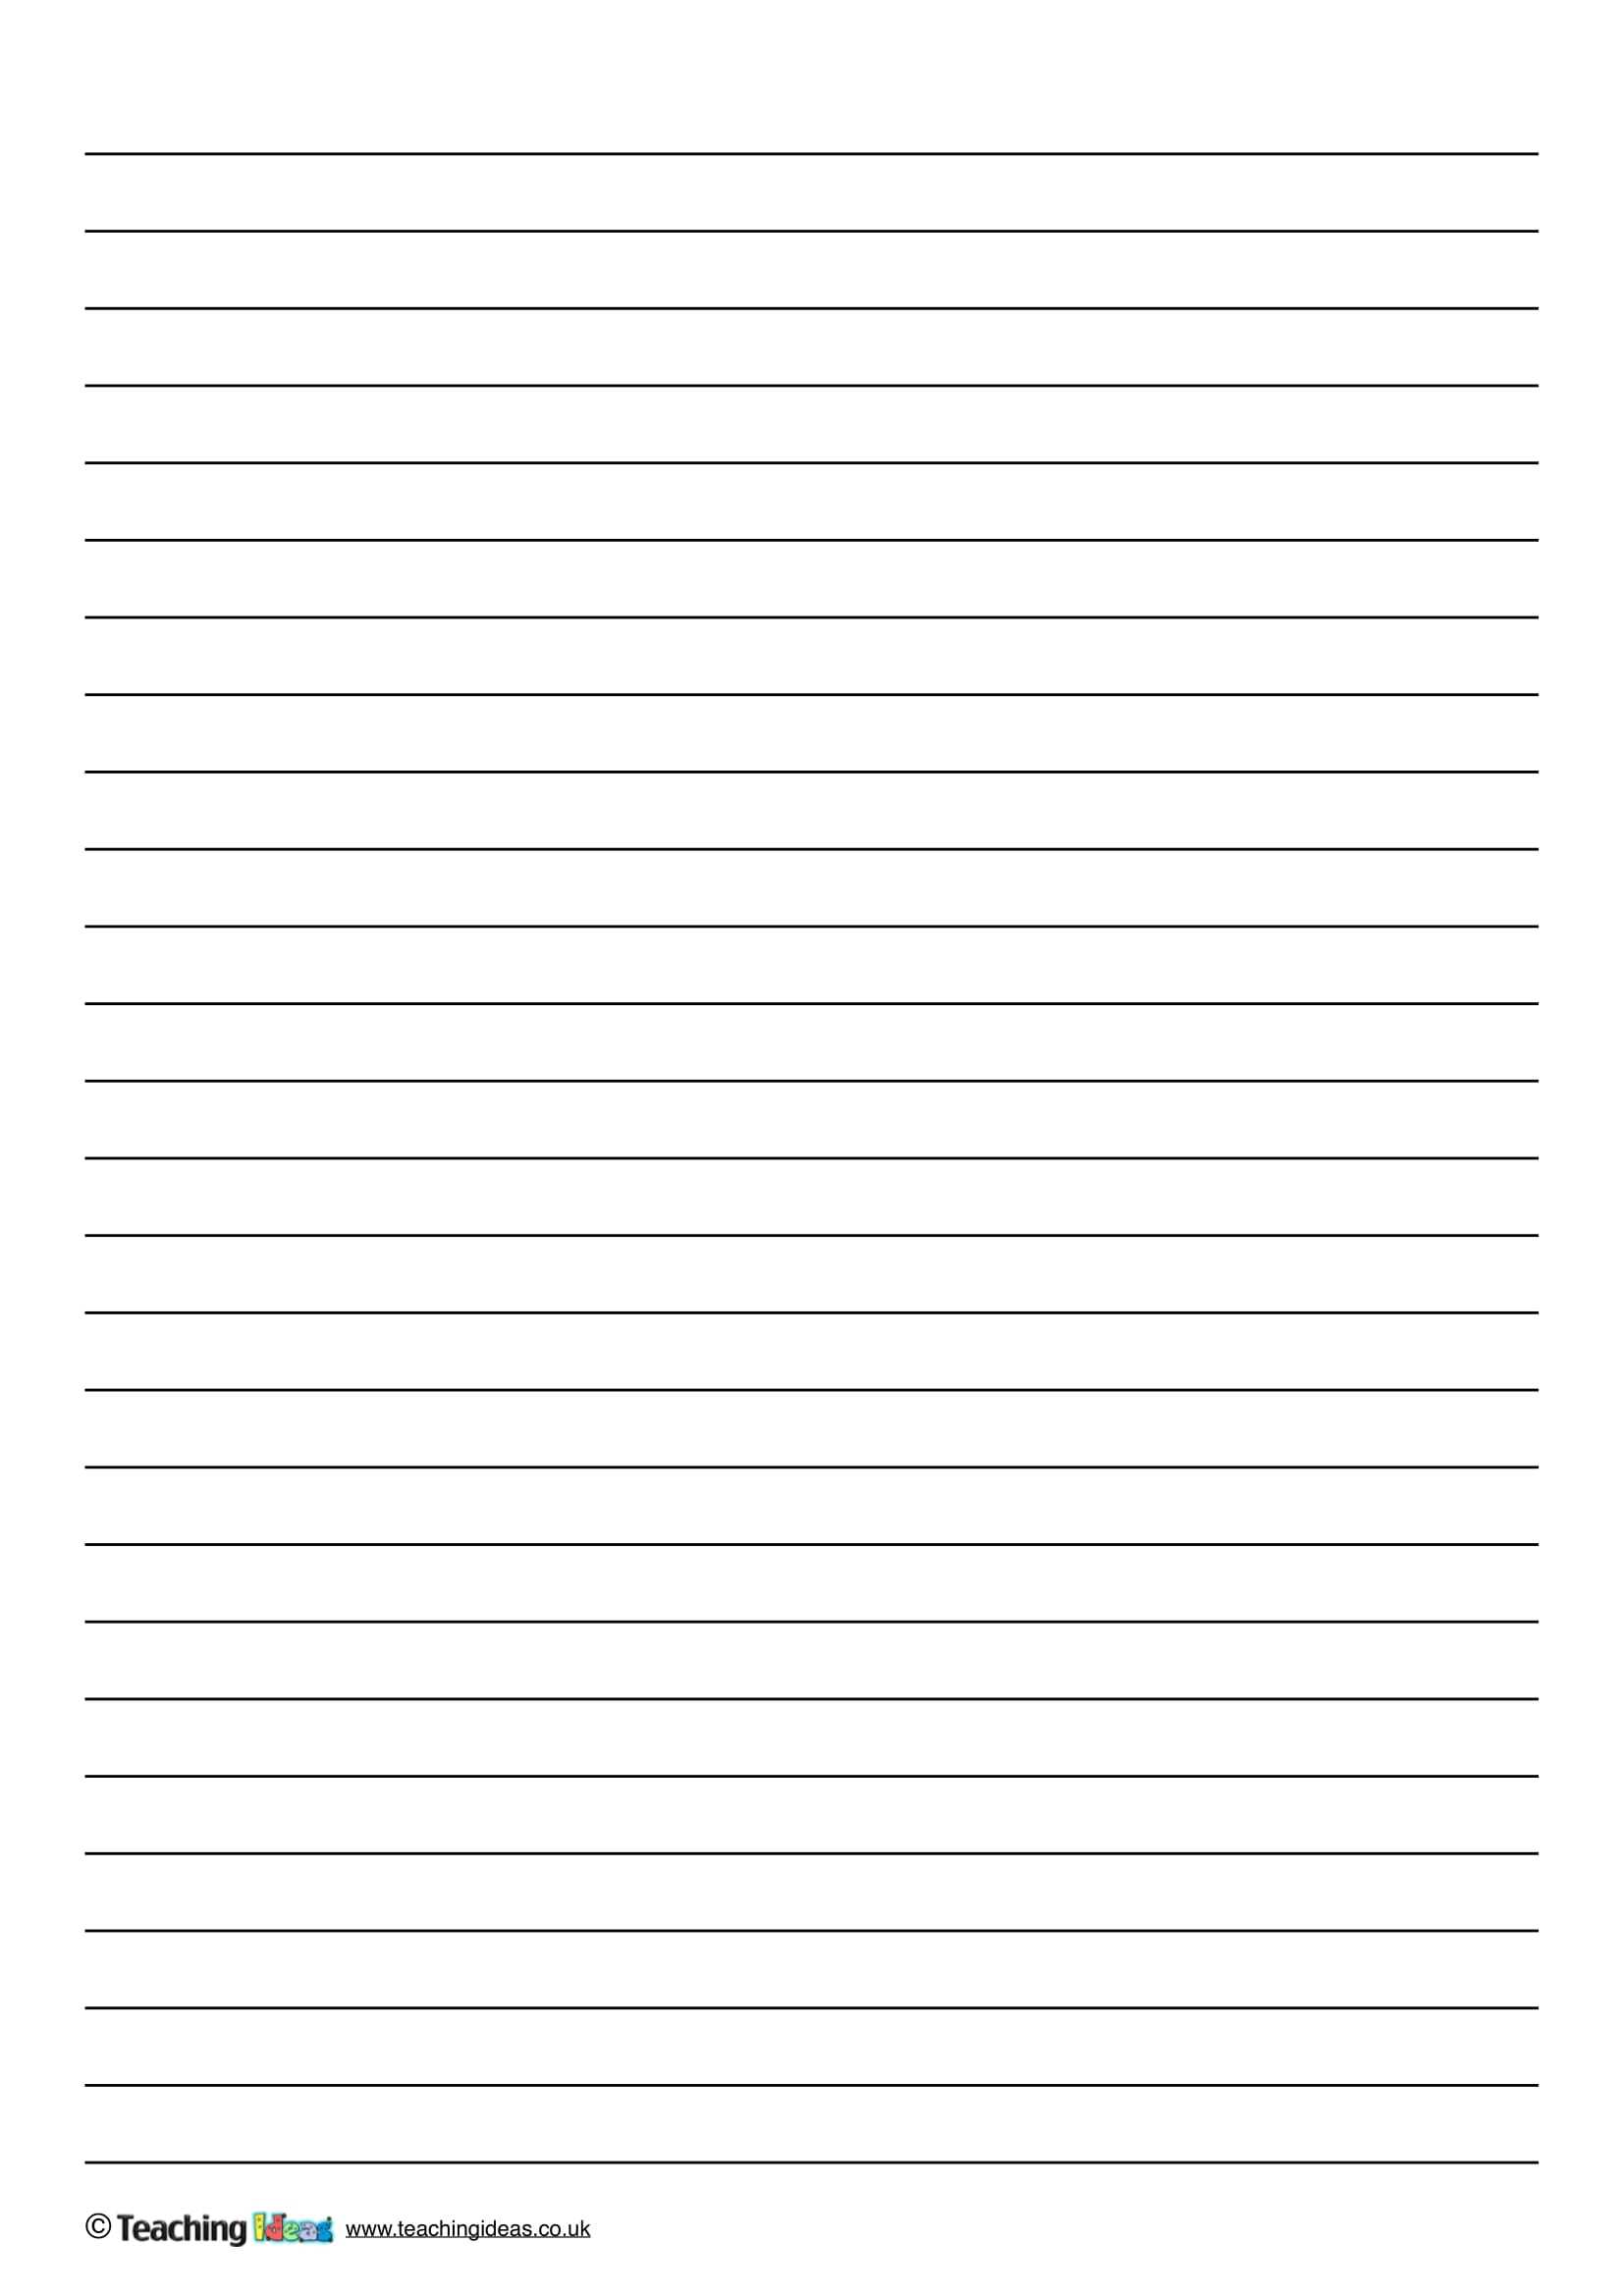 11+ Lined Paper Templates - Pdf | Free & Premium Templates Throughout Ruled Paper Template Word